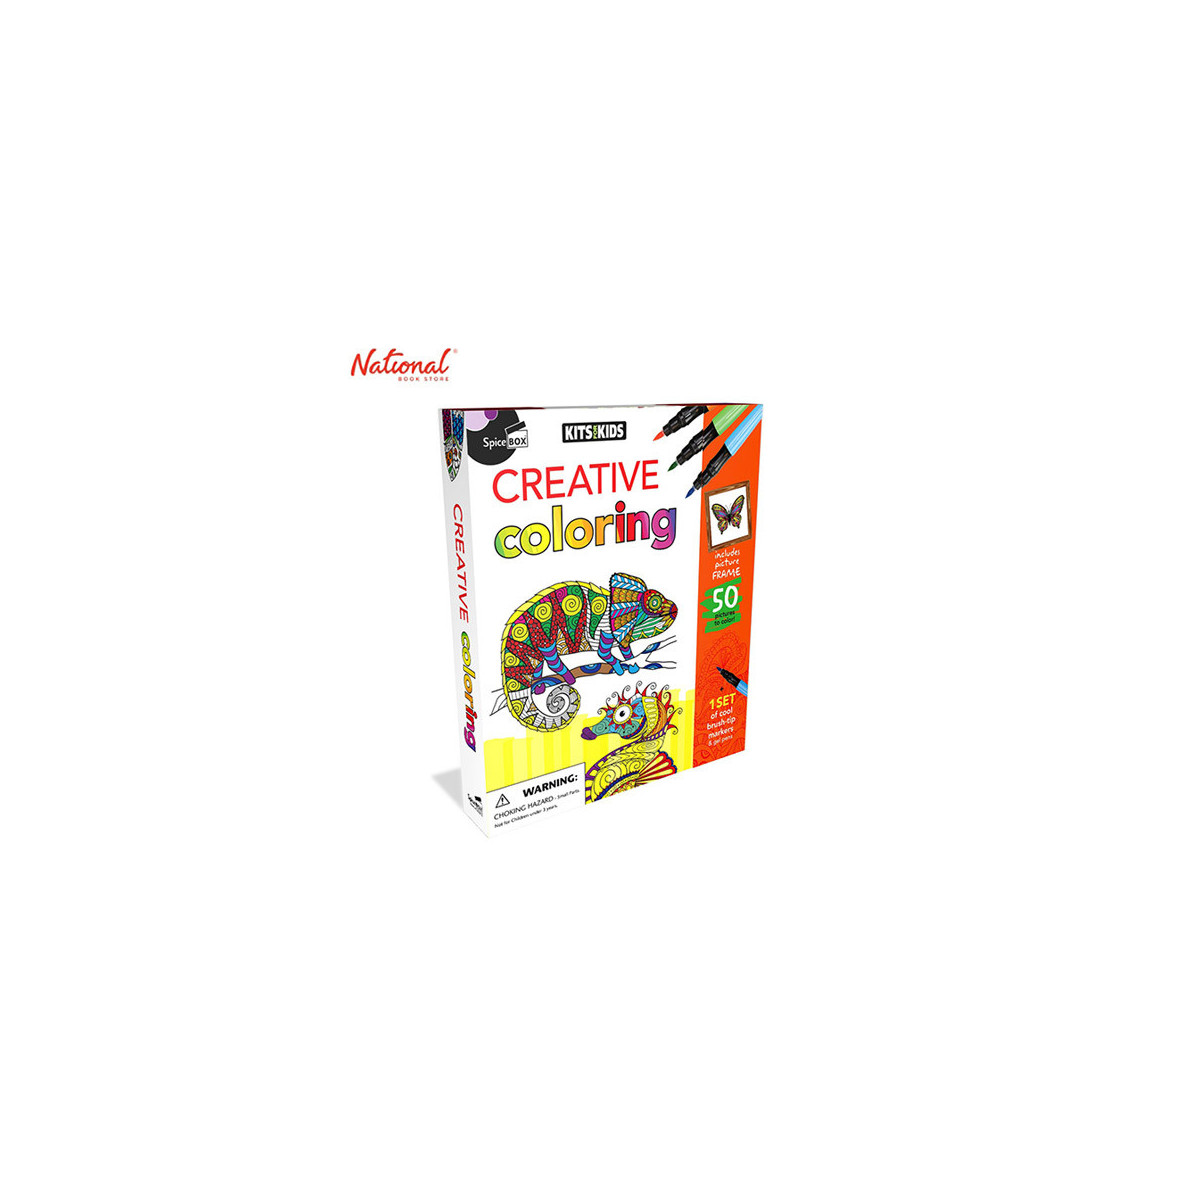 https://www.nationalbookstore.com/25863-thickbox_default/spicebox-kits-for-kids-8714-creative-coloring.jpg